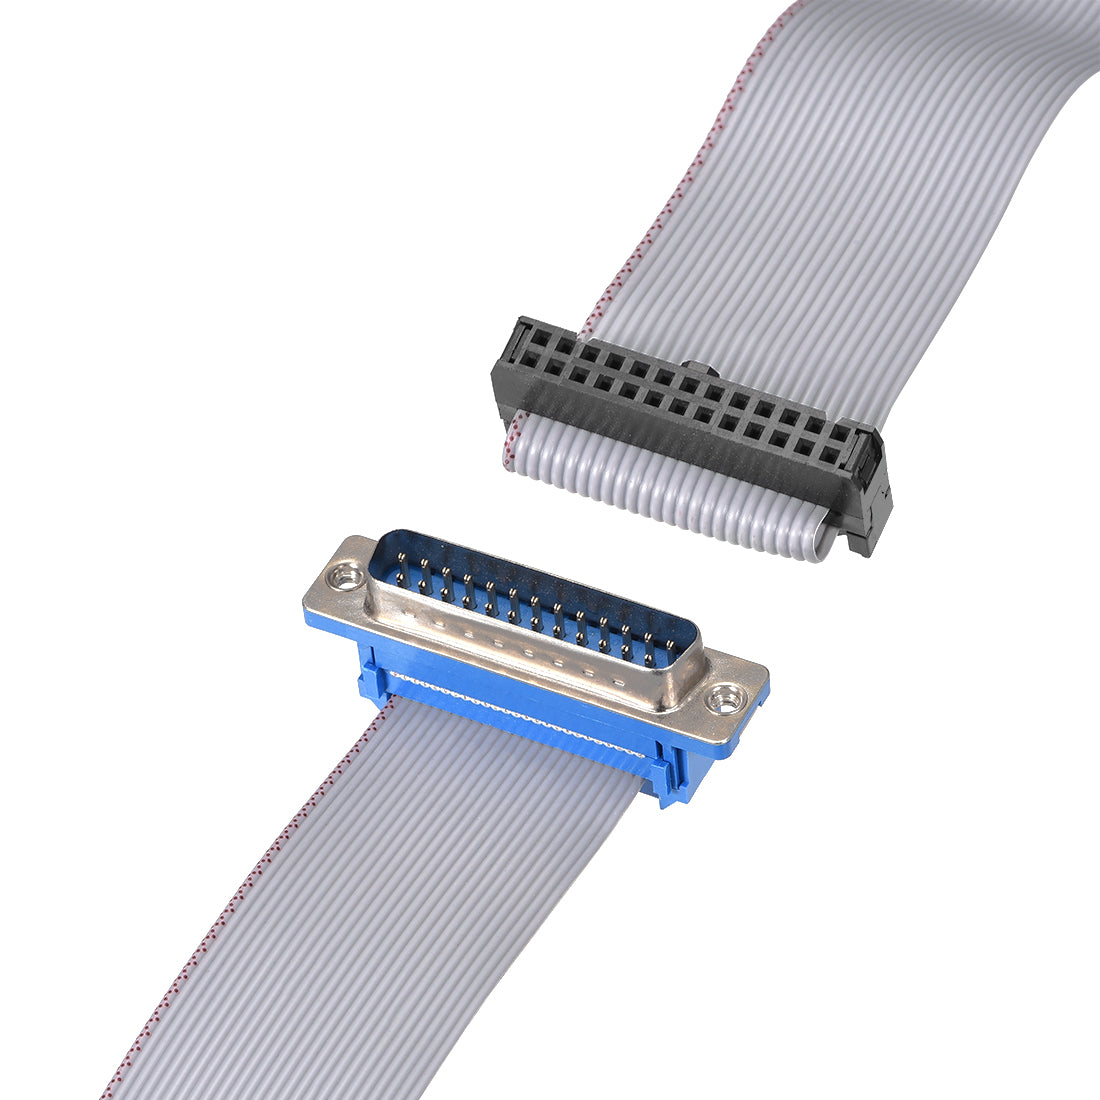 uxcell Uxcell IDC Wire Flat Ribbon Cable DB25 Male to FC-26 Female Connector 2.54mm Pitch 20cm Length , 2pcs